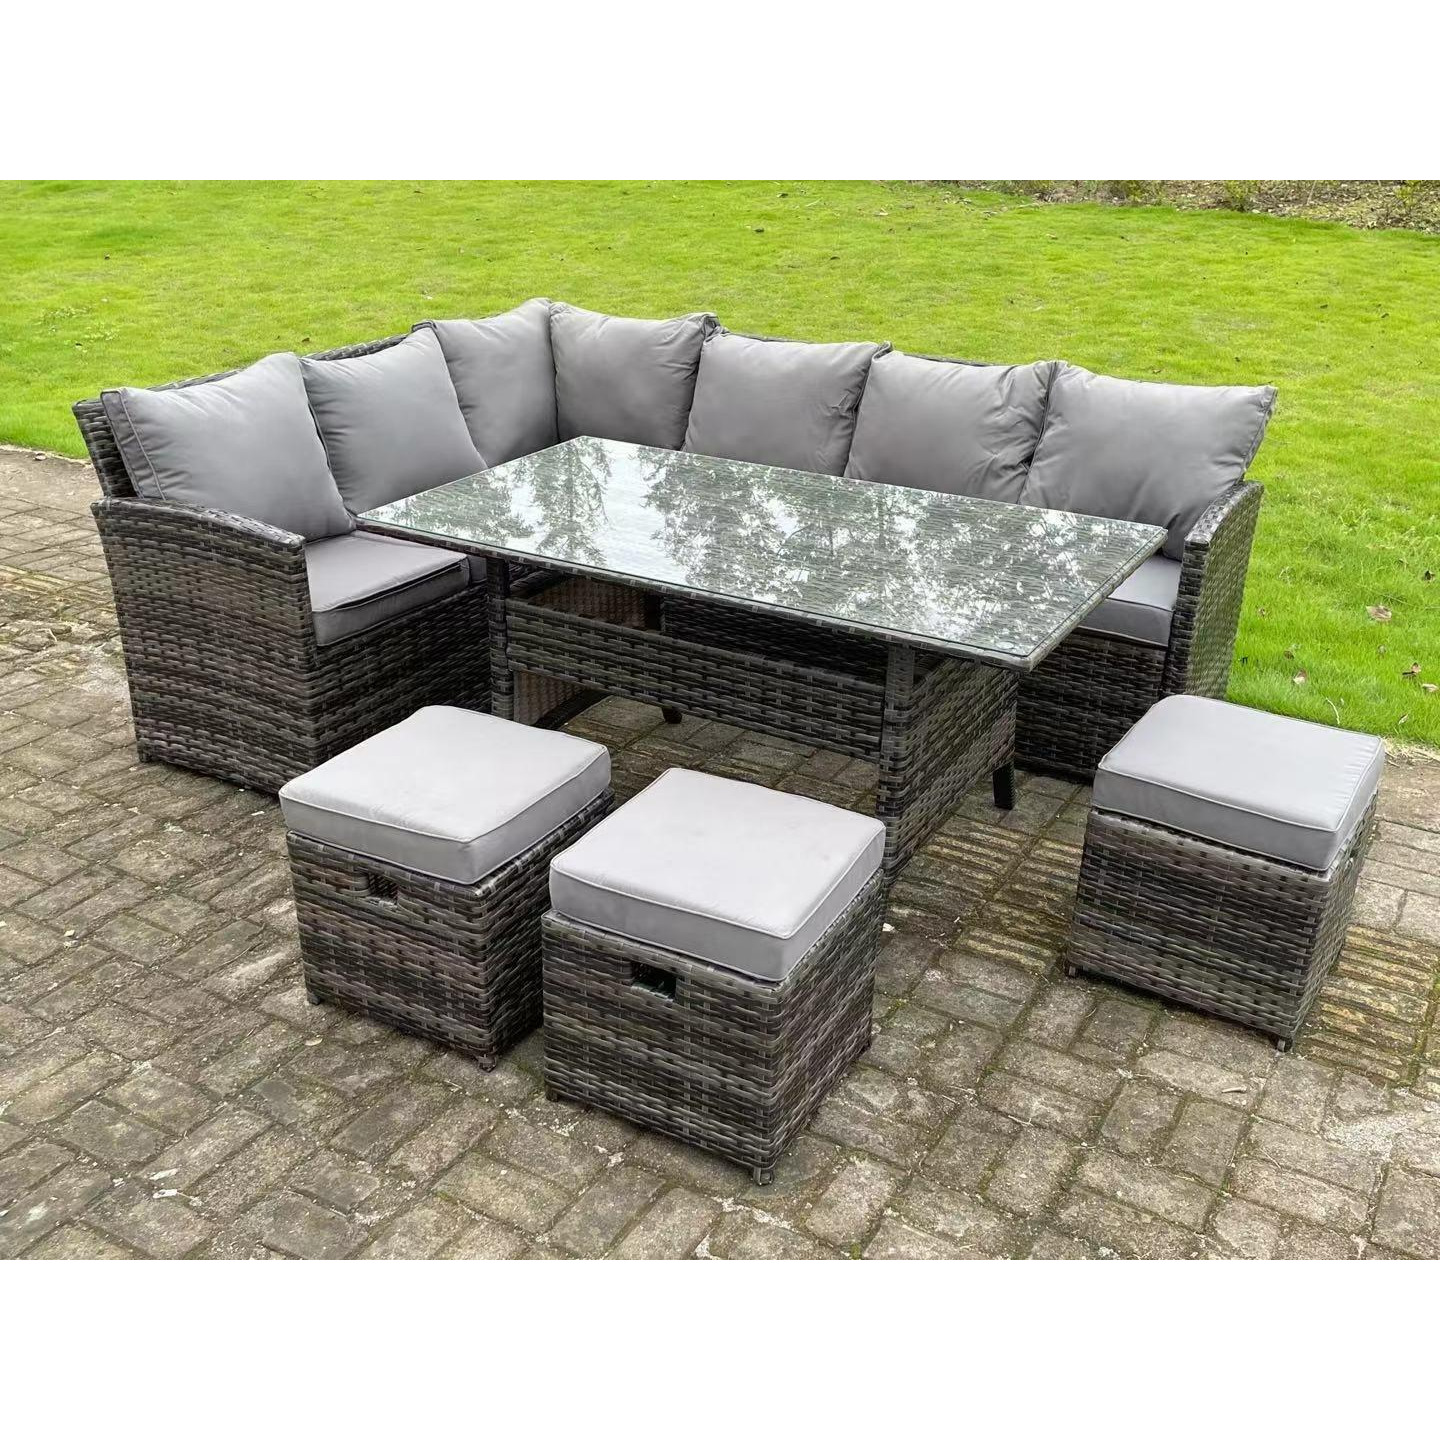 Semi-Assembled 9 Seater Rattan Garden Furniture Corner Sofa Dining Sets Outdoor Patio With 3 Stools - image 1